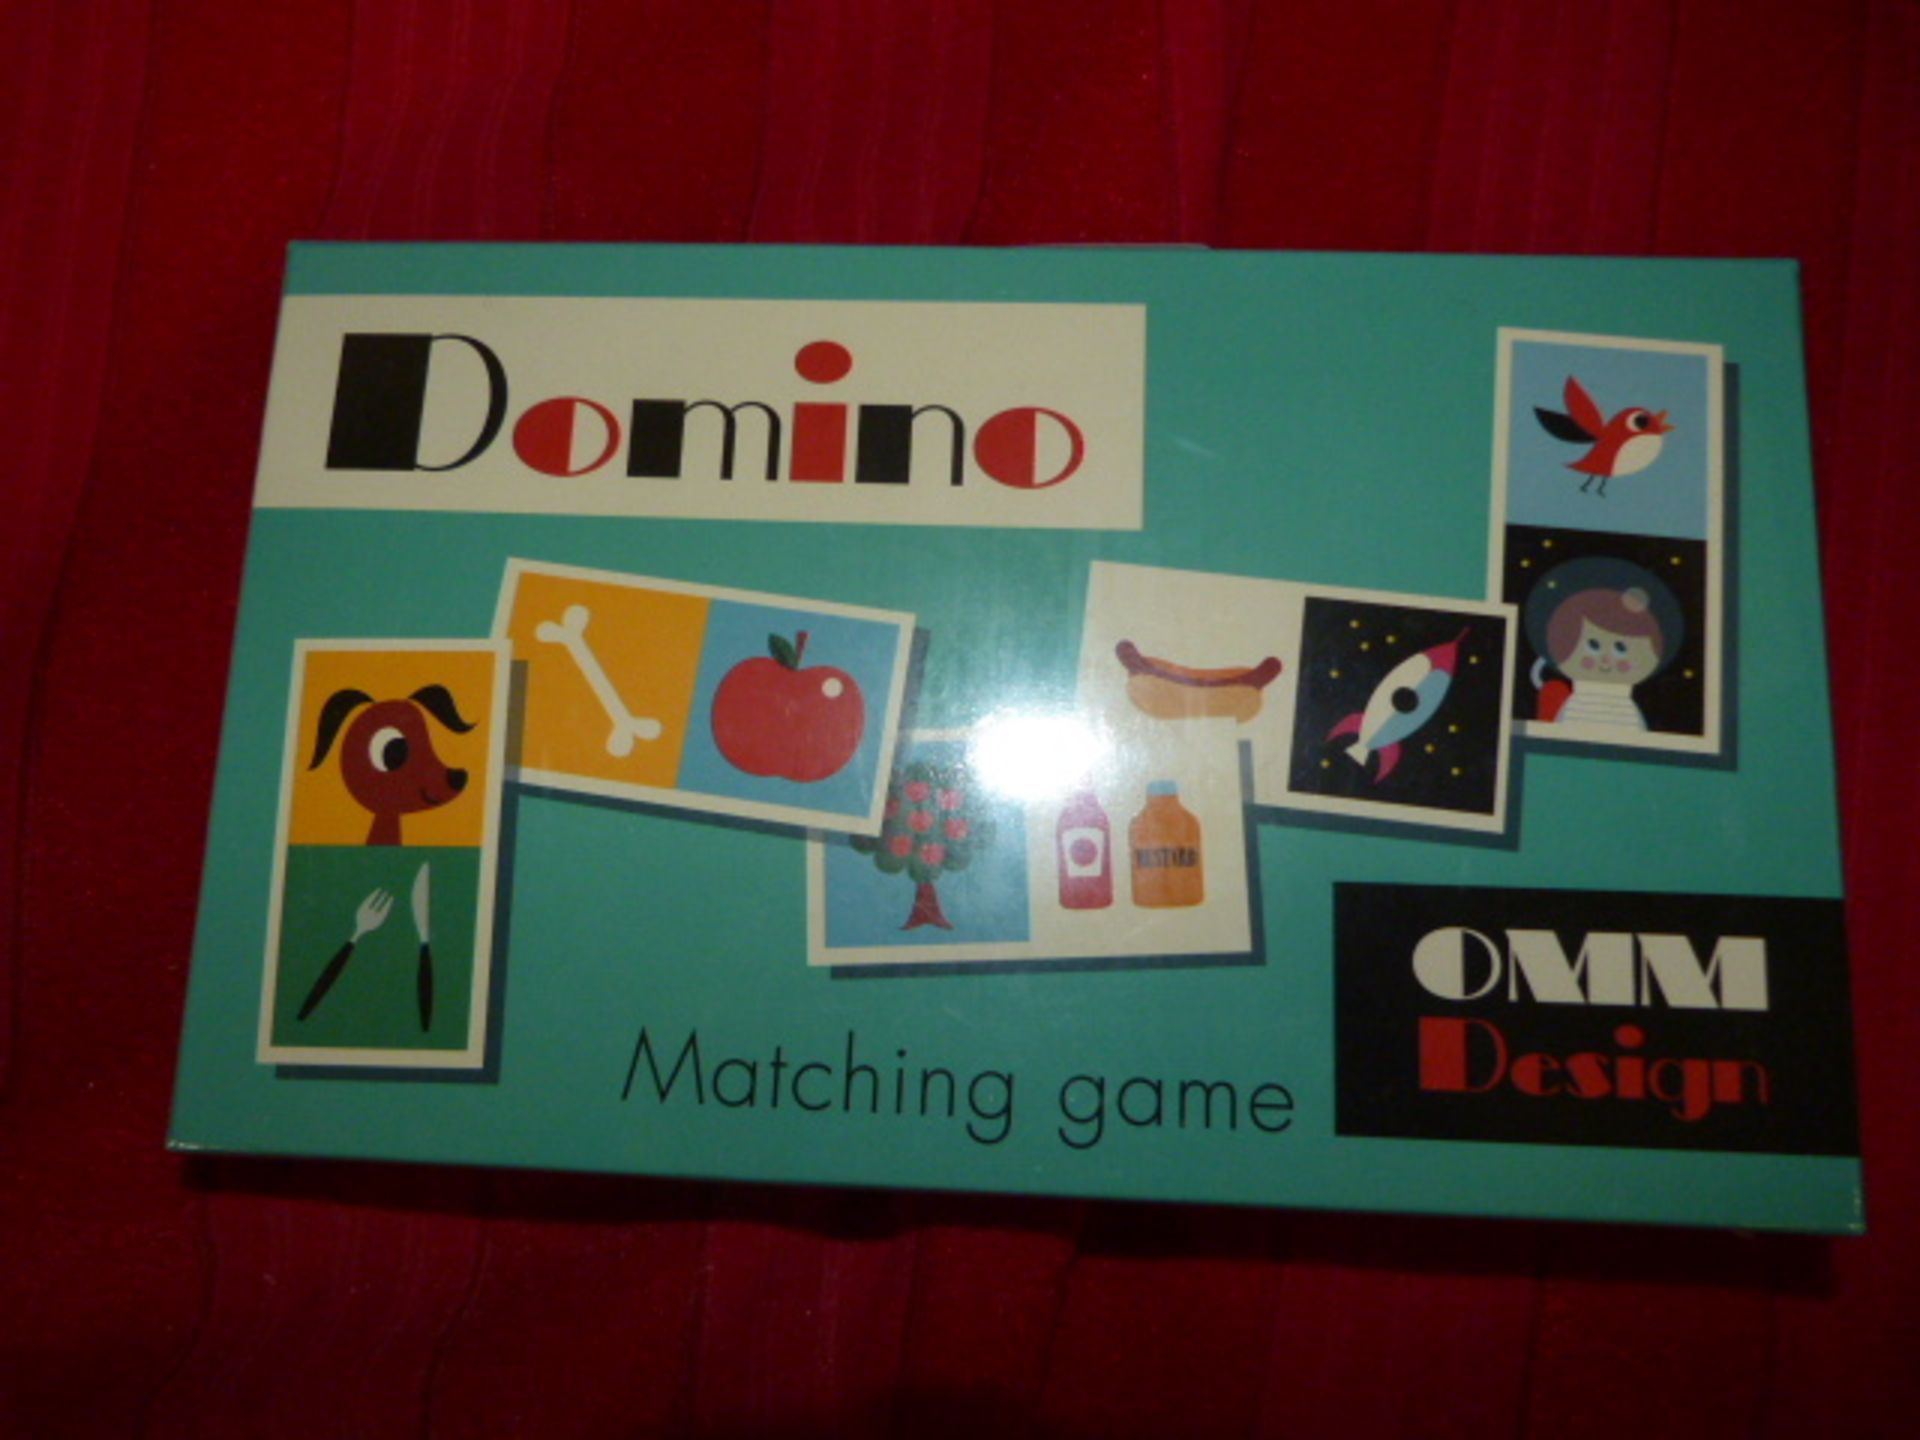 *Domino Matching Game by Omm Design (Marked Retail